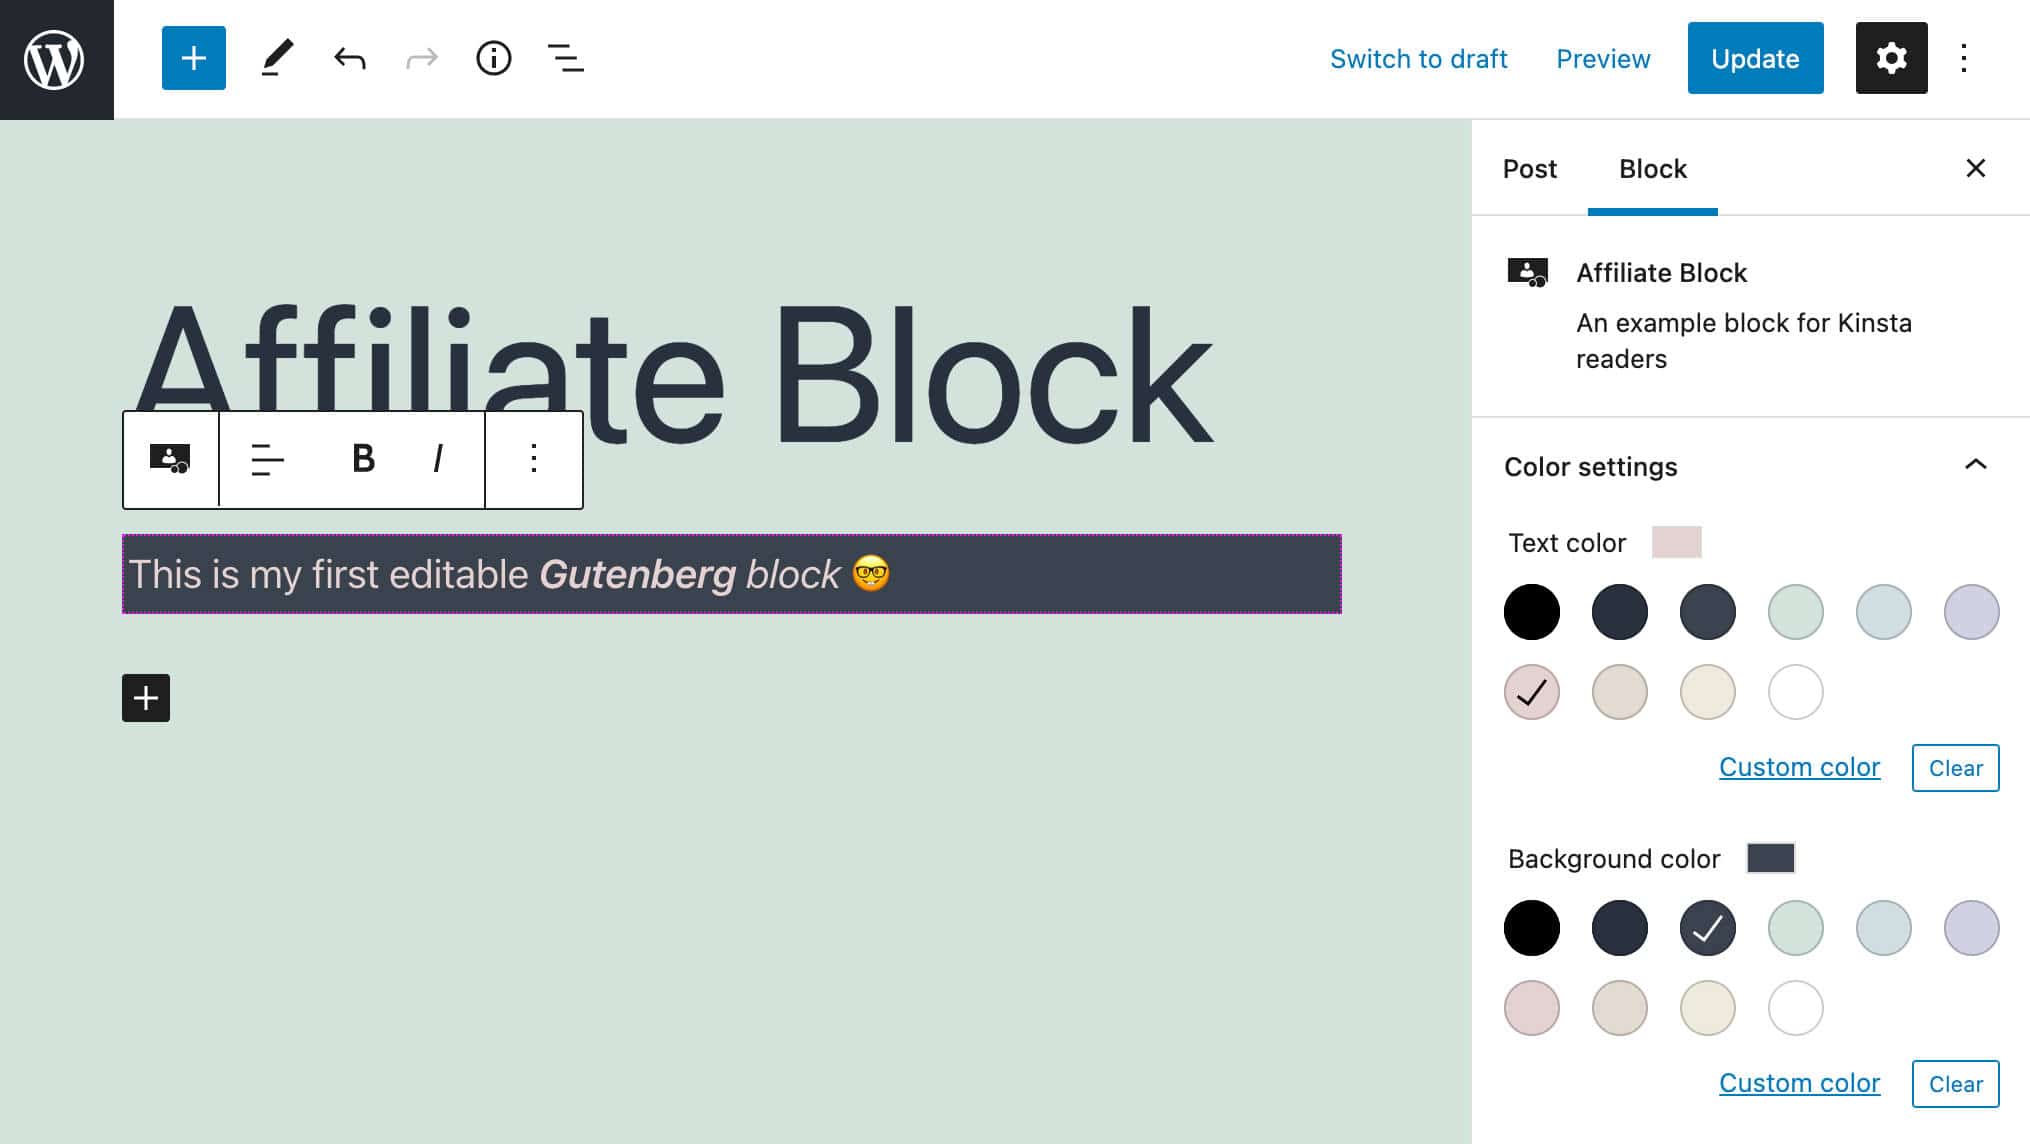 A custom block with a Color Settings panel." width="2030" height="1144"  />

<p class=